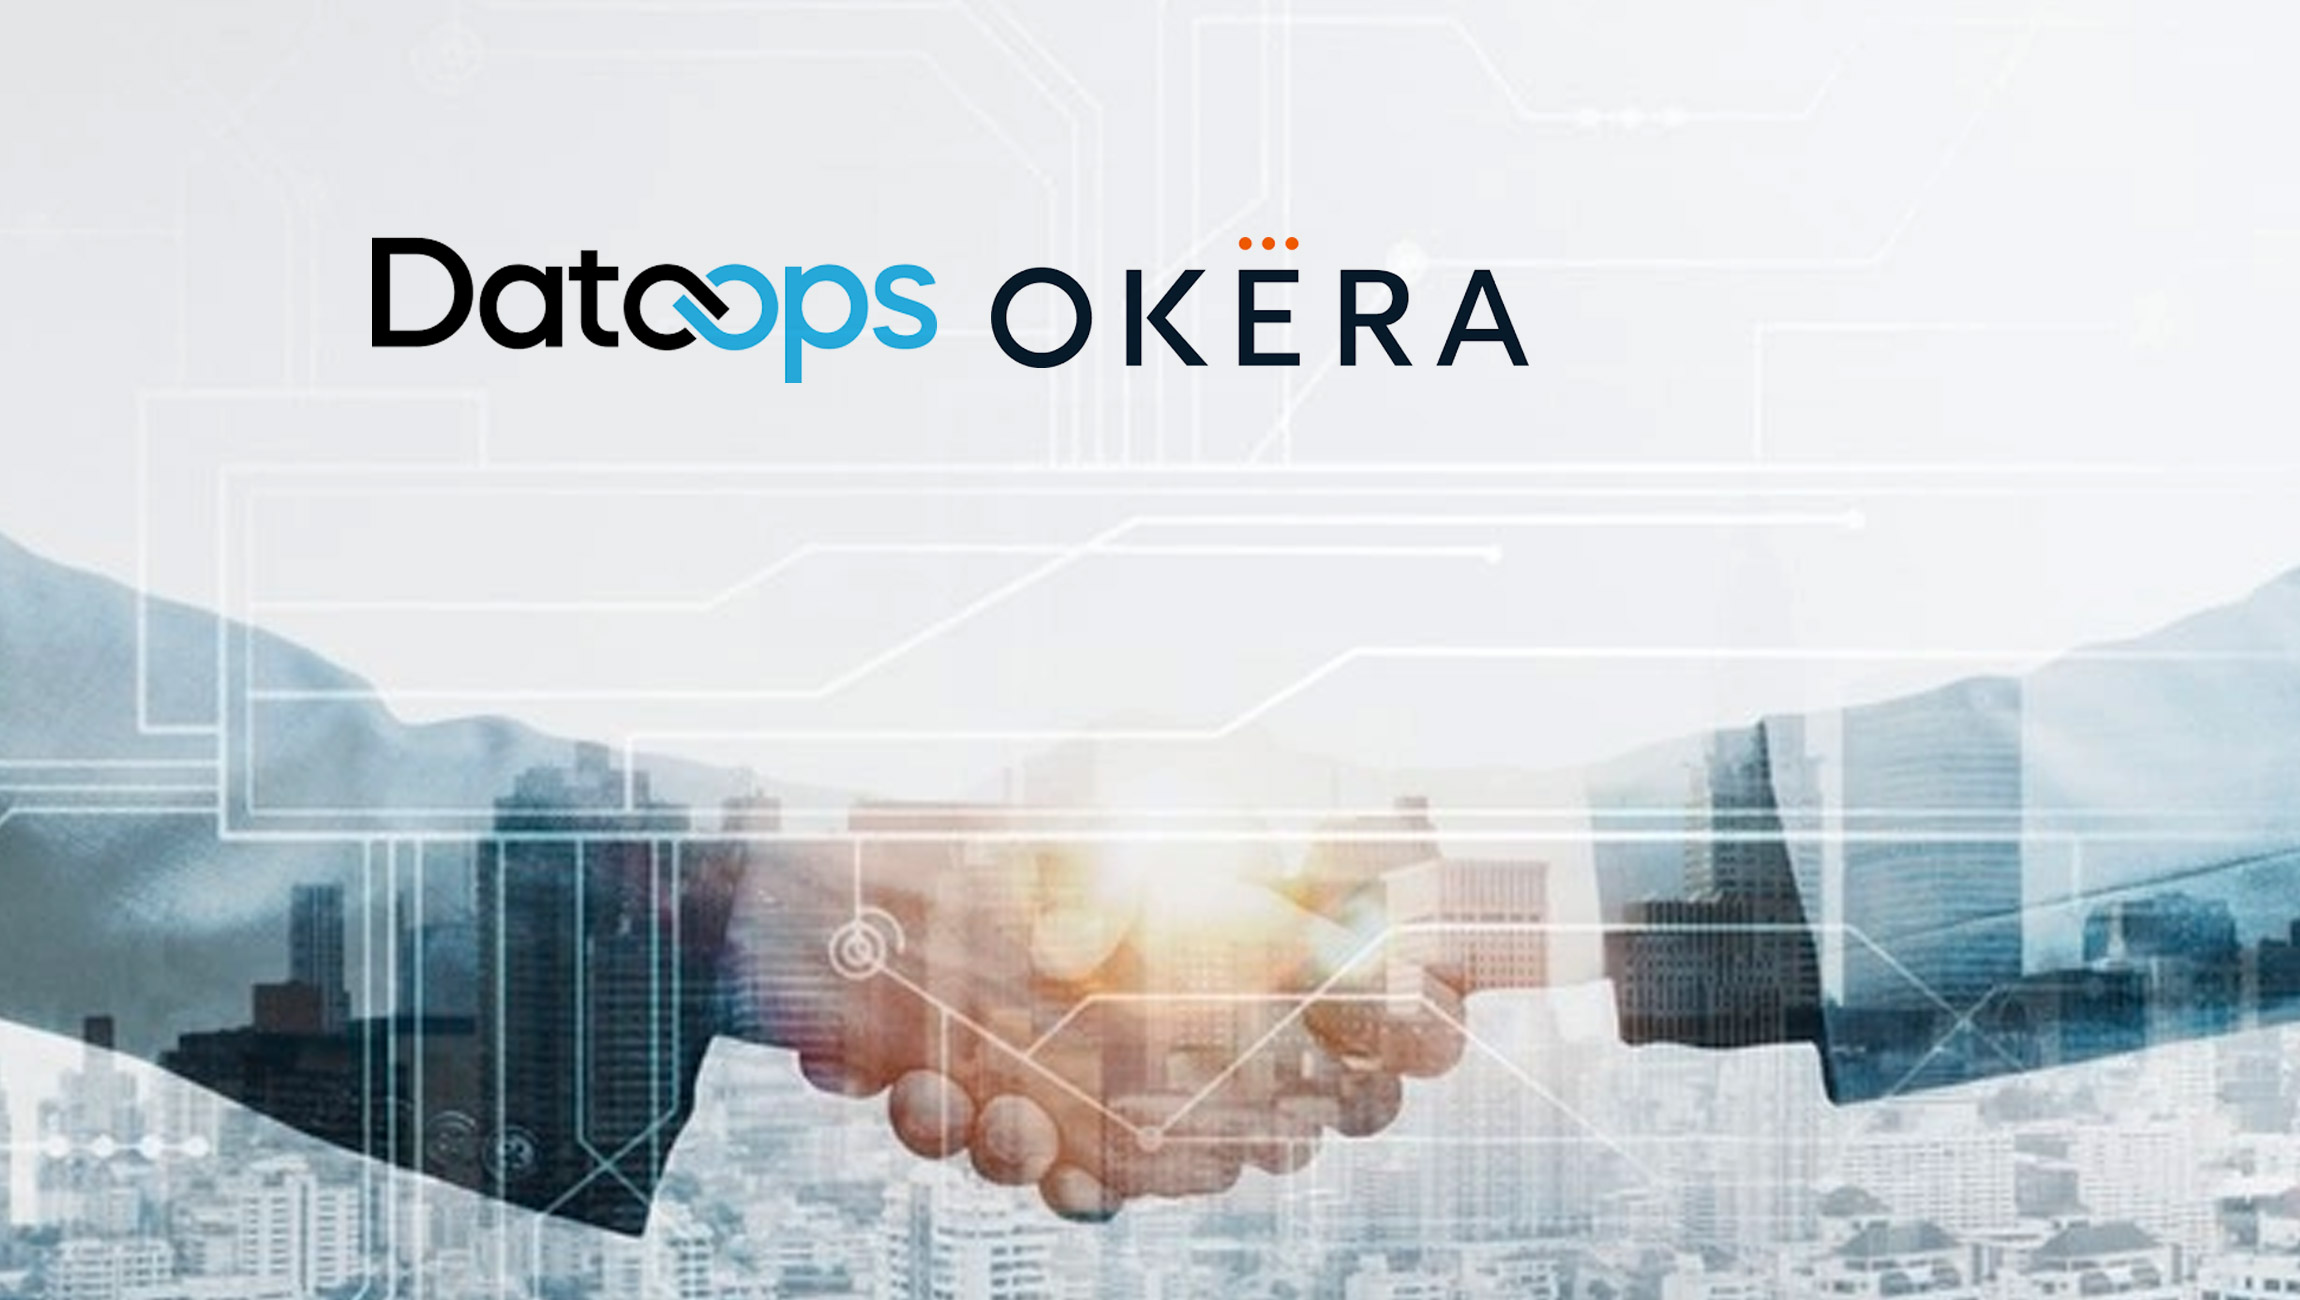 DataOps.live and Okera Joint Solution Automates and Extends Snowflake Data Security Across the Enterprise